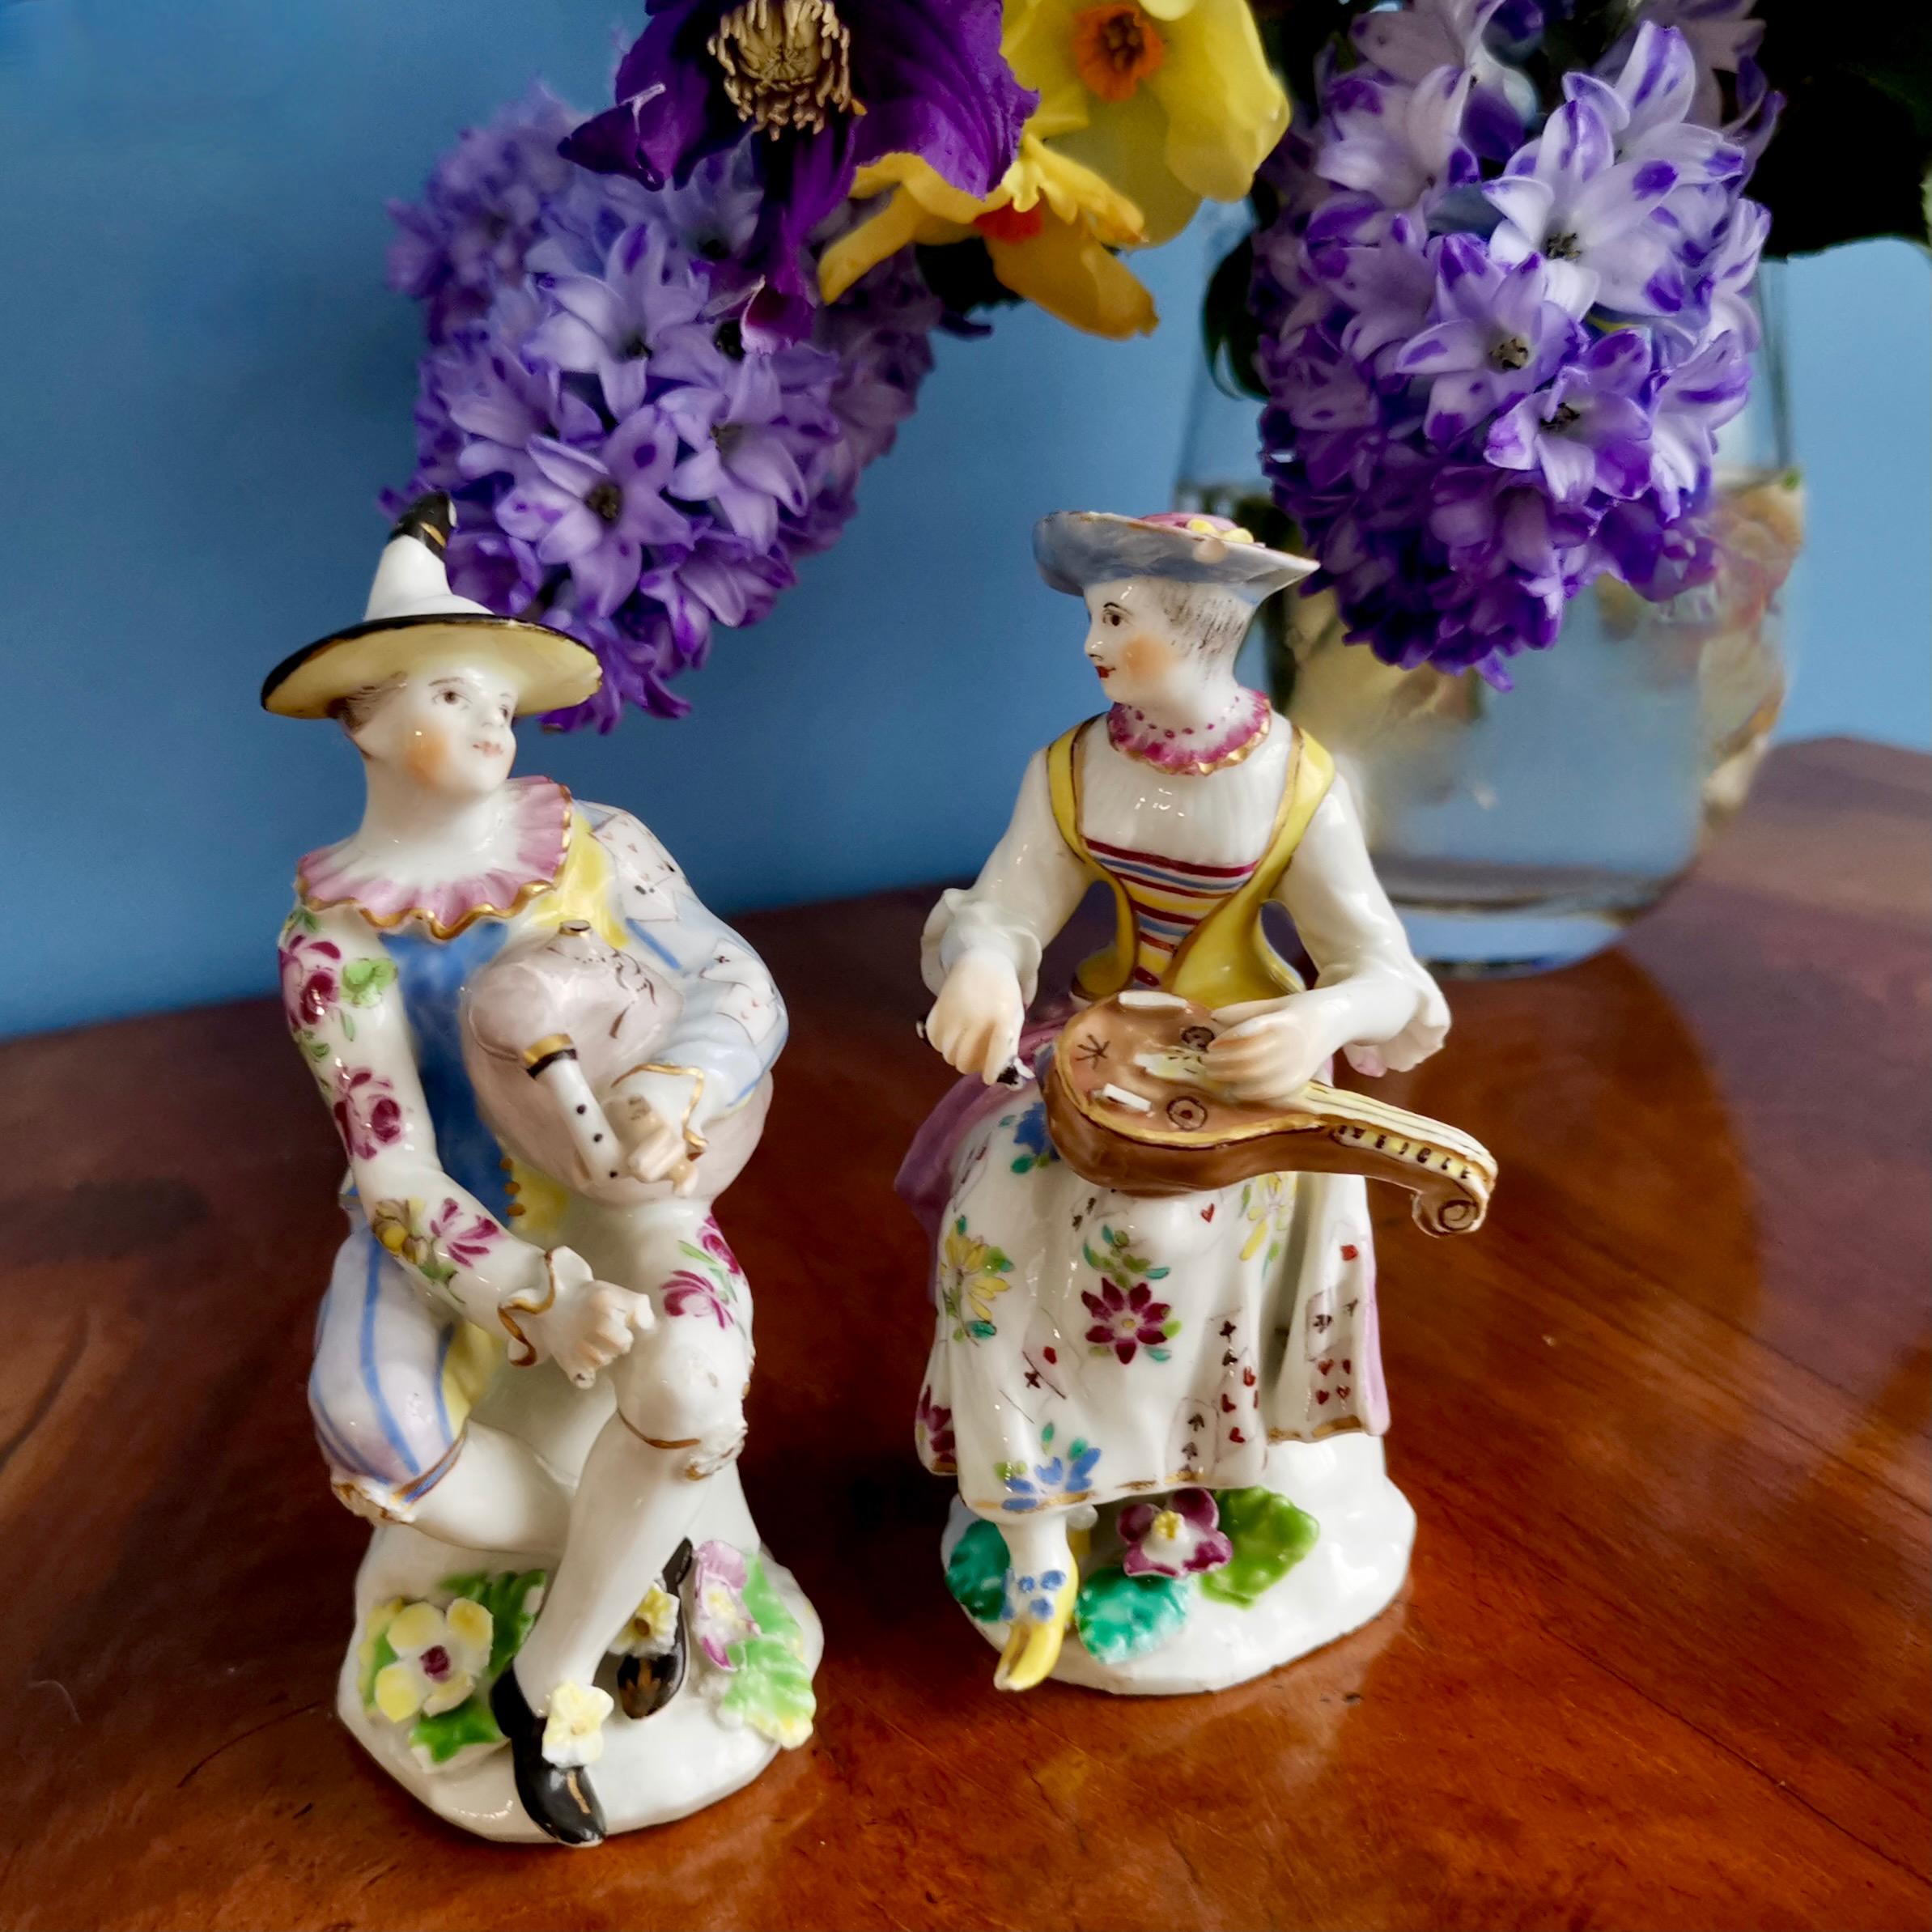 This is a wonderful pair of figures of Arlecchino and Columbina, made by the Bow Porcelain factory in about 1758. These figures formed part of a series of the Commedia dell'Arte, a very popular series of theatrical figures that served as decoration